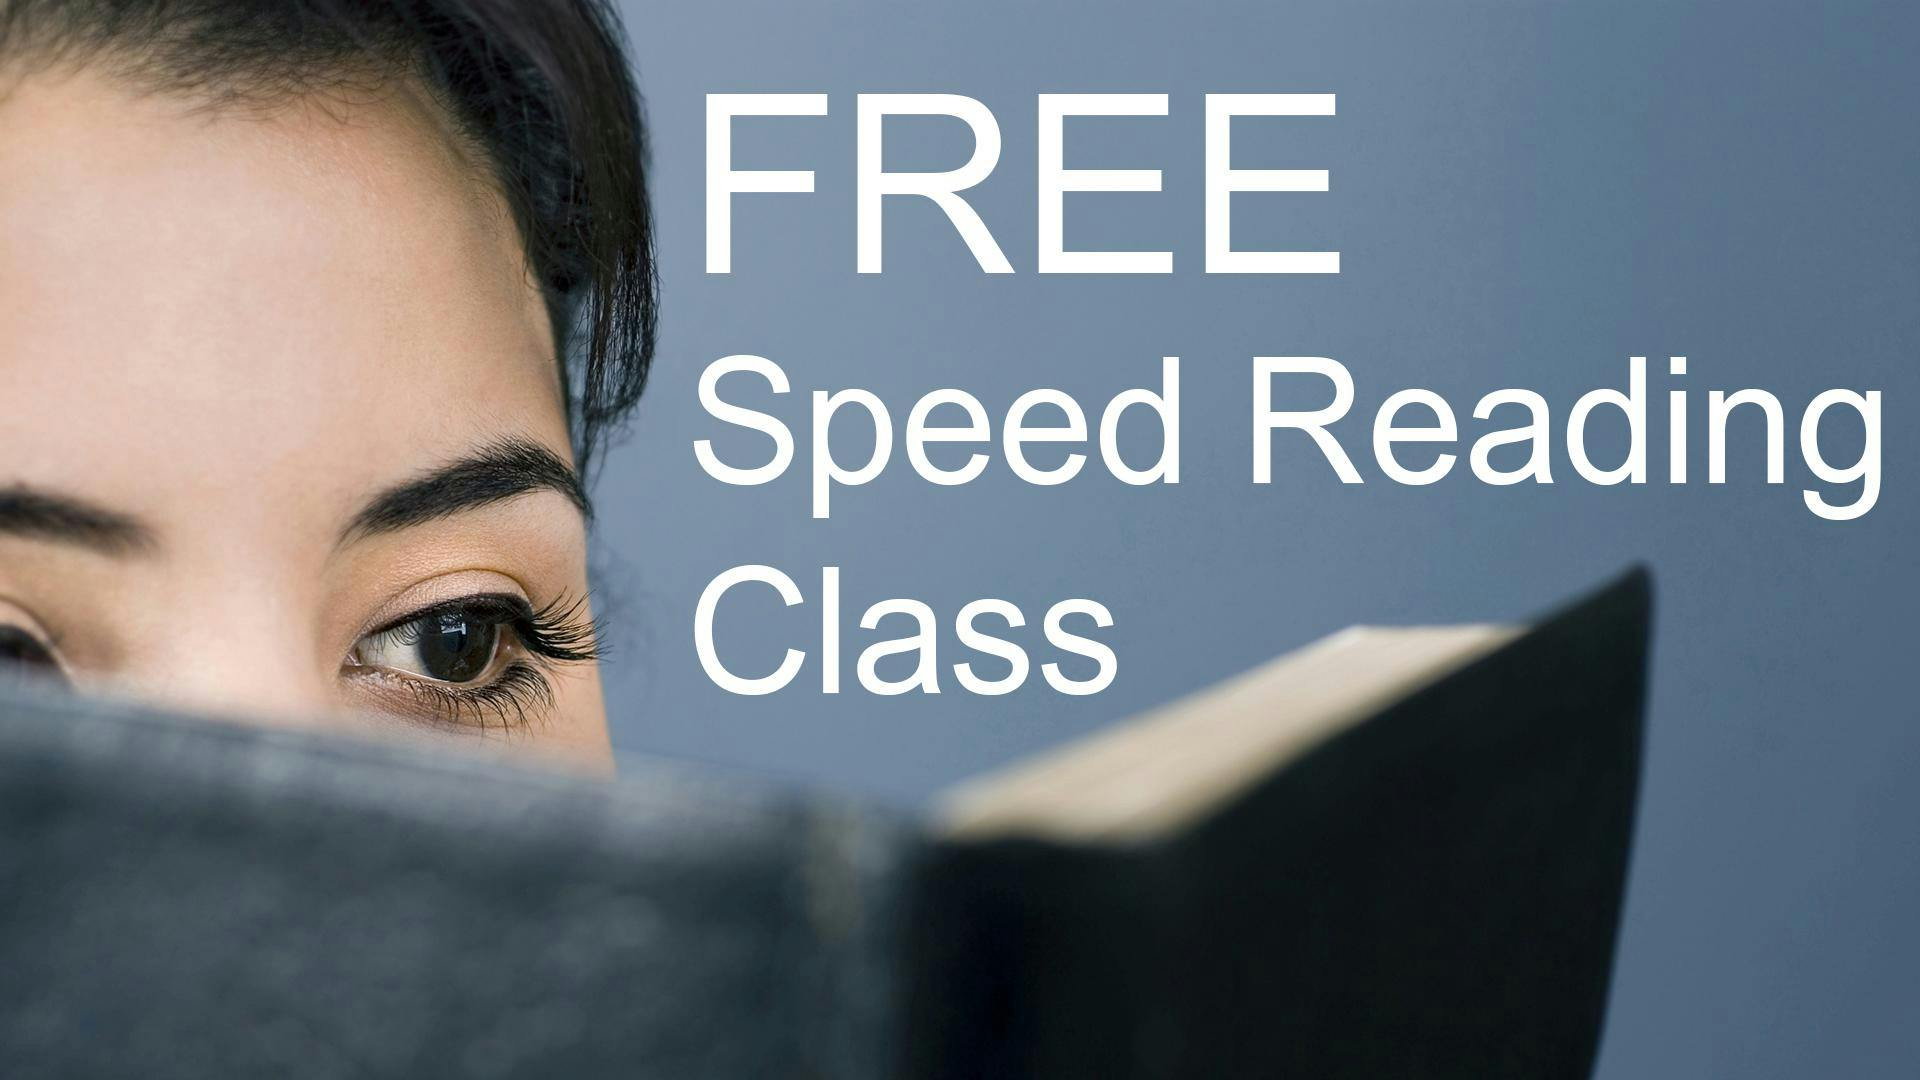 Free Speed Reading Class - Des Moines